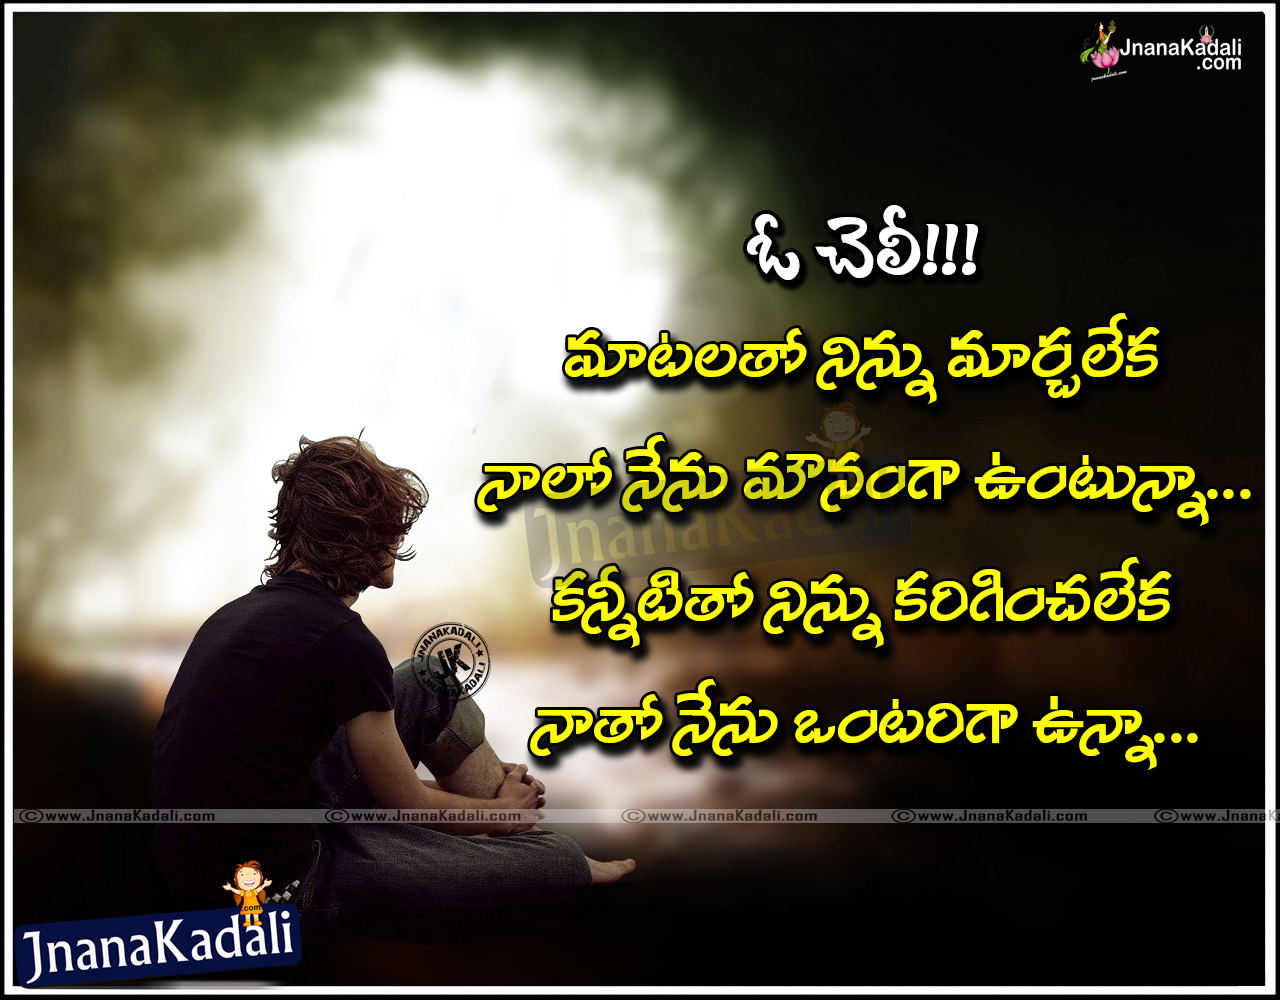 Here is Love Failure Sad Alone Quotes Heart Breaking Love Quotes with HD PREMA KAVITHALU Nice Heart Touching Love Quotes in English